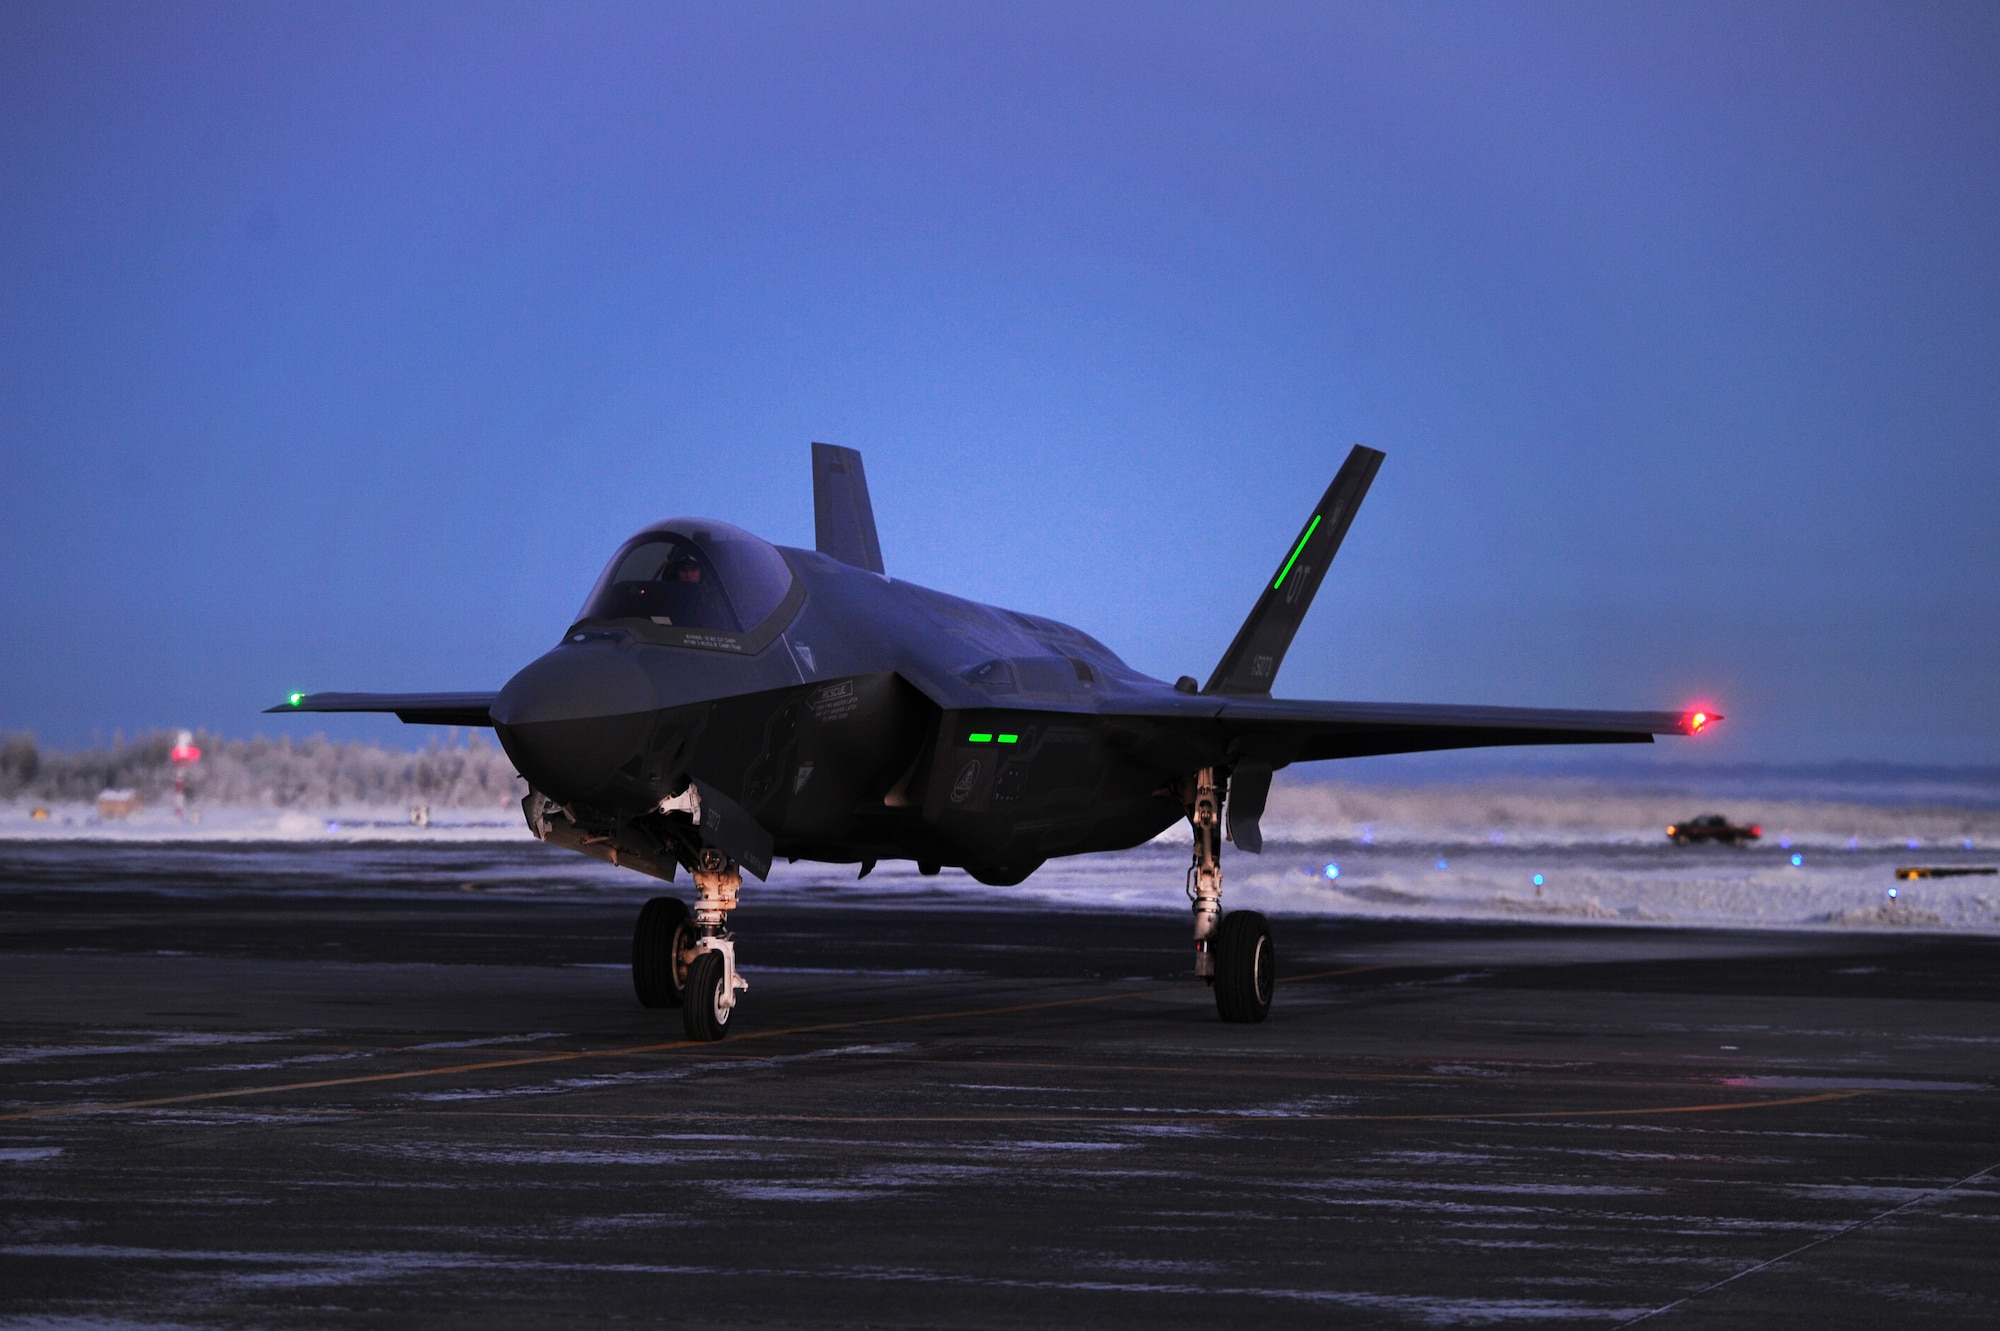 A U.S. Air Force F-35A Lightning II multi-role fighter aircraft waits to take off Feb. 2, 2018 at Eielson Air Force Base, Alaska. The Joint Strike Fighter Operational Test Team consists of Air Force, Marine and Navy personnel responsible for conducting and evaluating operational tests on the F-35. (U.S. Air Force photo by Airman 1st Class Eric M. Fisher)